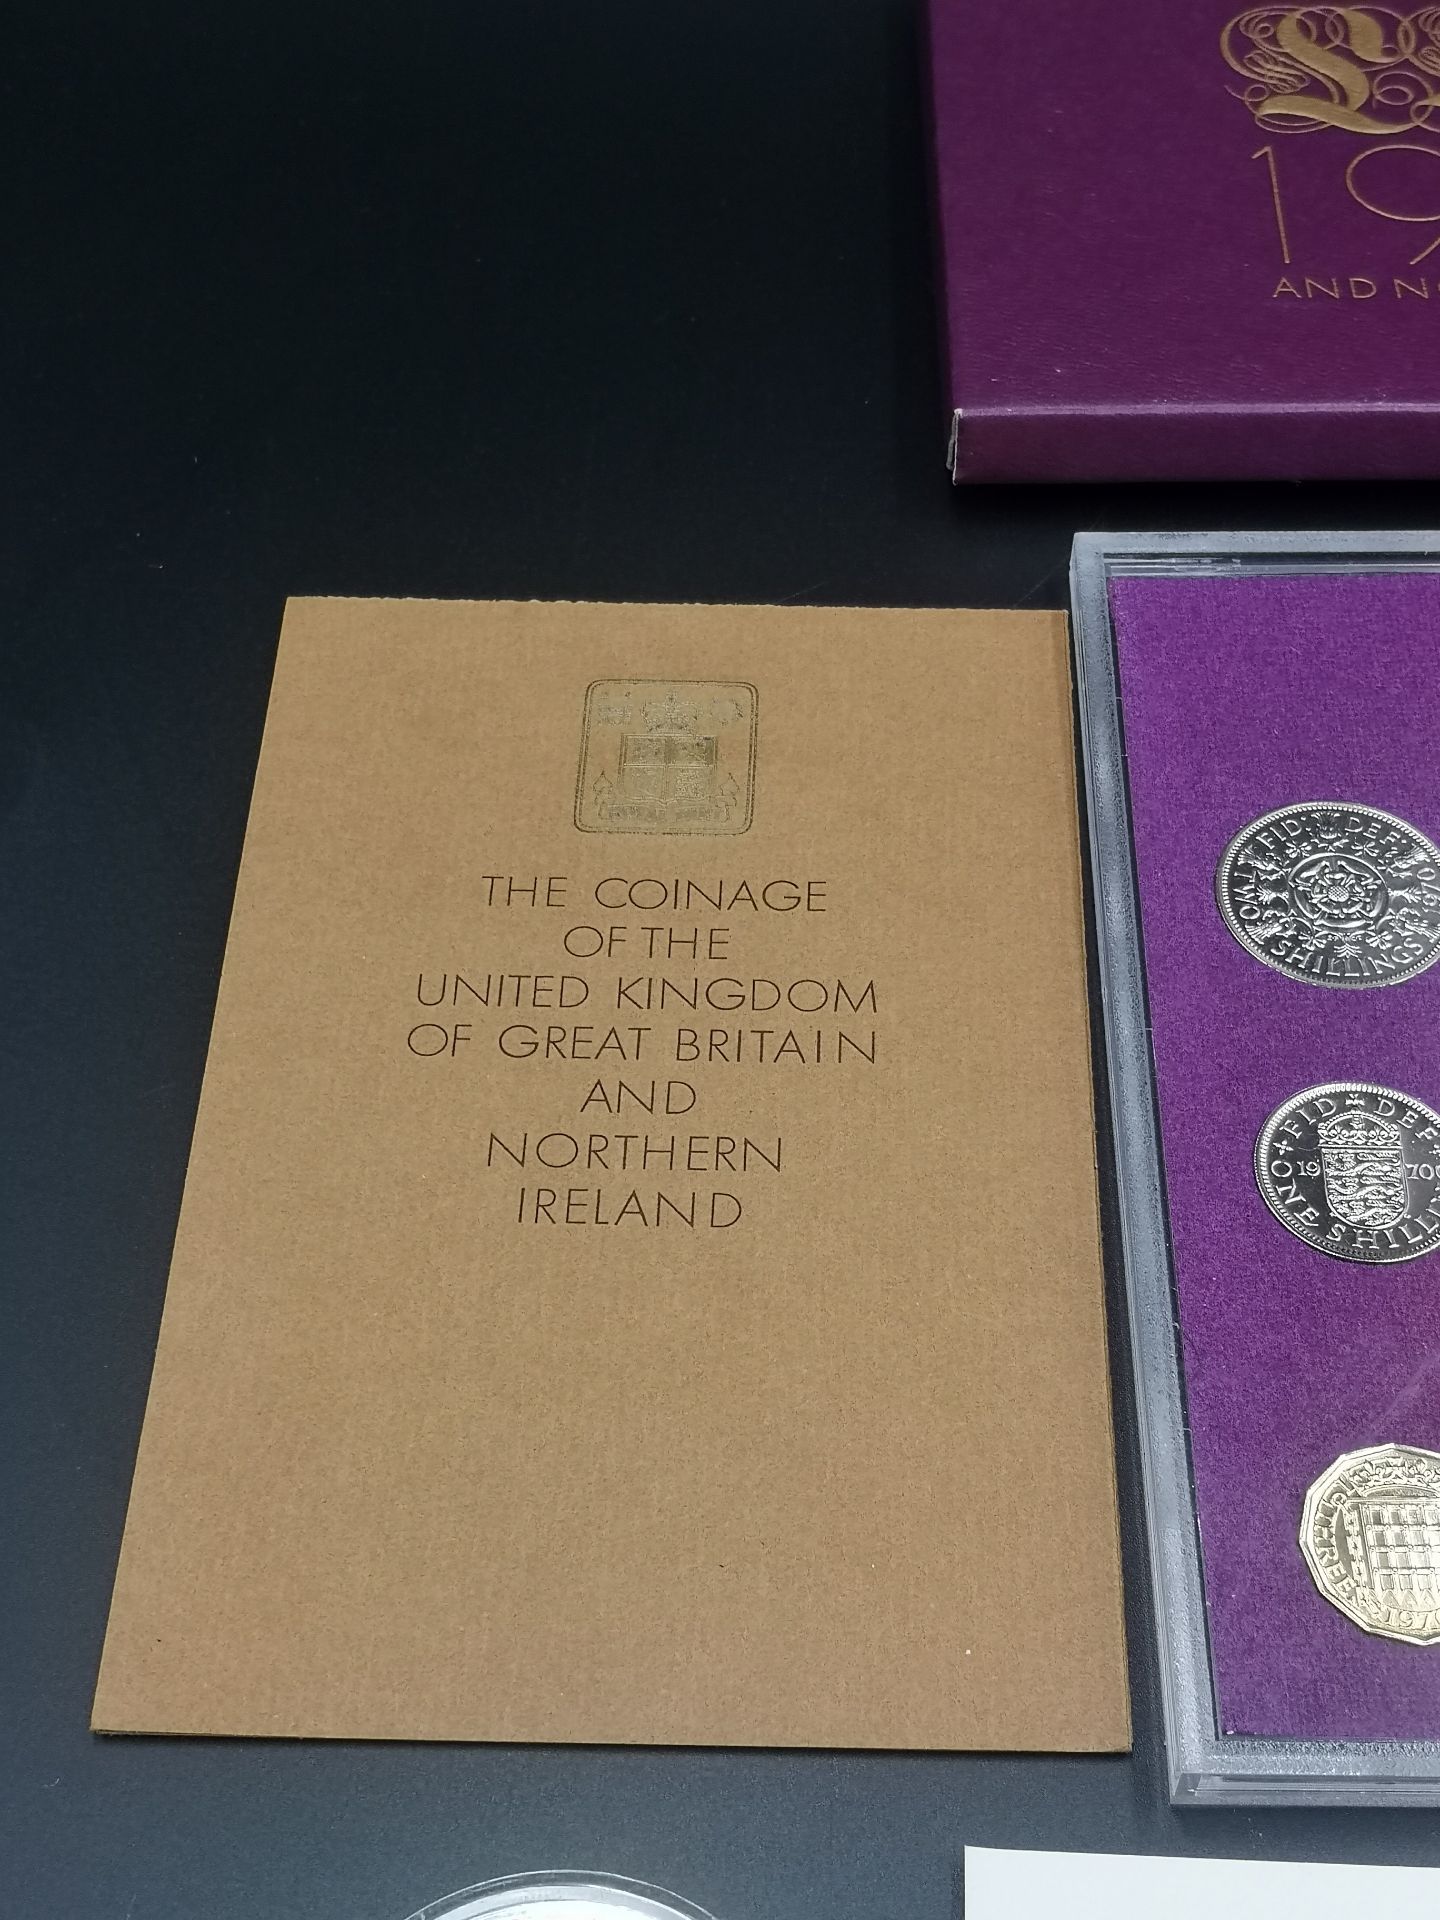 Six RAF museum silver coins, together with a Royal Mint proof set - Image 4 of 6